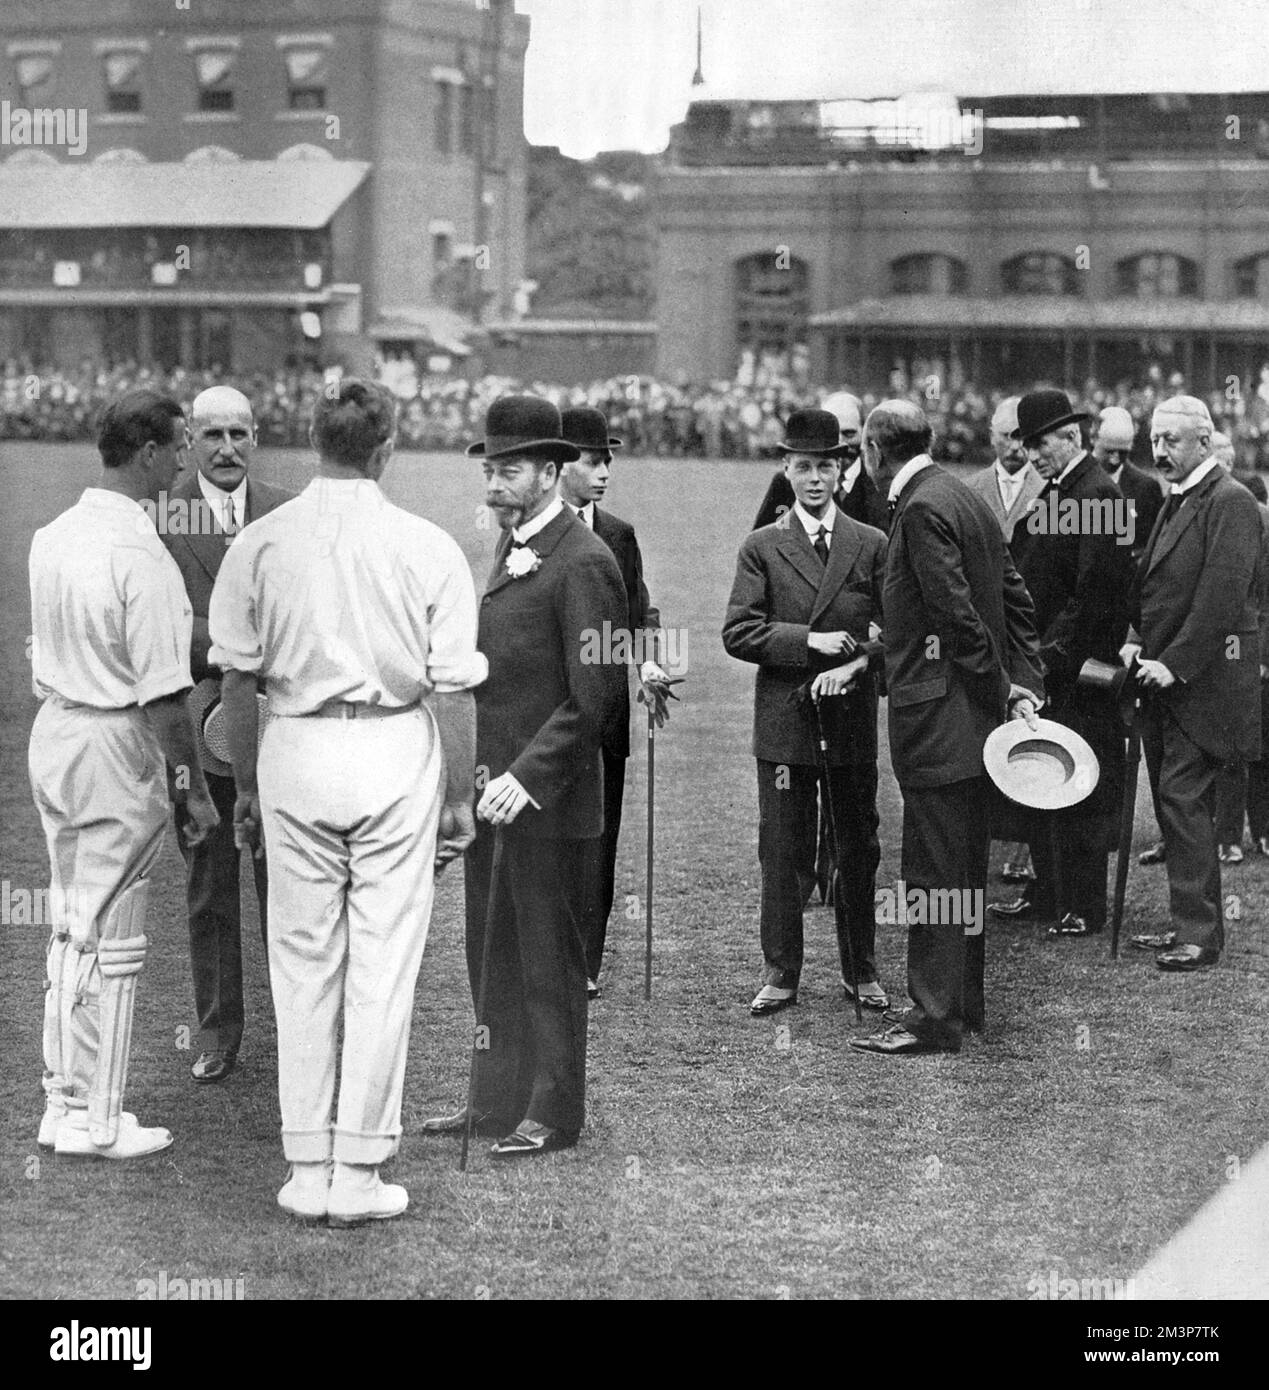 King George V and Edward, Prince of Wales (later King Edward VIII and then Duke of Windsor), pictured at Lord's cricket ground where its centenary was being celebrated in June 1914.  The occasion was marked by a match between M.C.C. South African heroes and the Rest of England.  The King is pictured chatting to Mr C. B. Fry, Mr Johnny Douglas and Lord Hawke.  Prince Albert (later King George VI) is seen just behind the King, and the Prince of Wales is talking to Mr F. E. Lacey.  On the right are Sir C. Cust and the Duke of Devonshire.     Date: 1914 Stock Photo